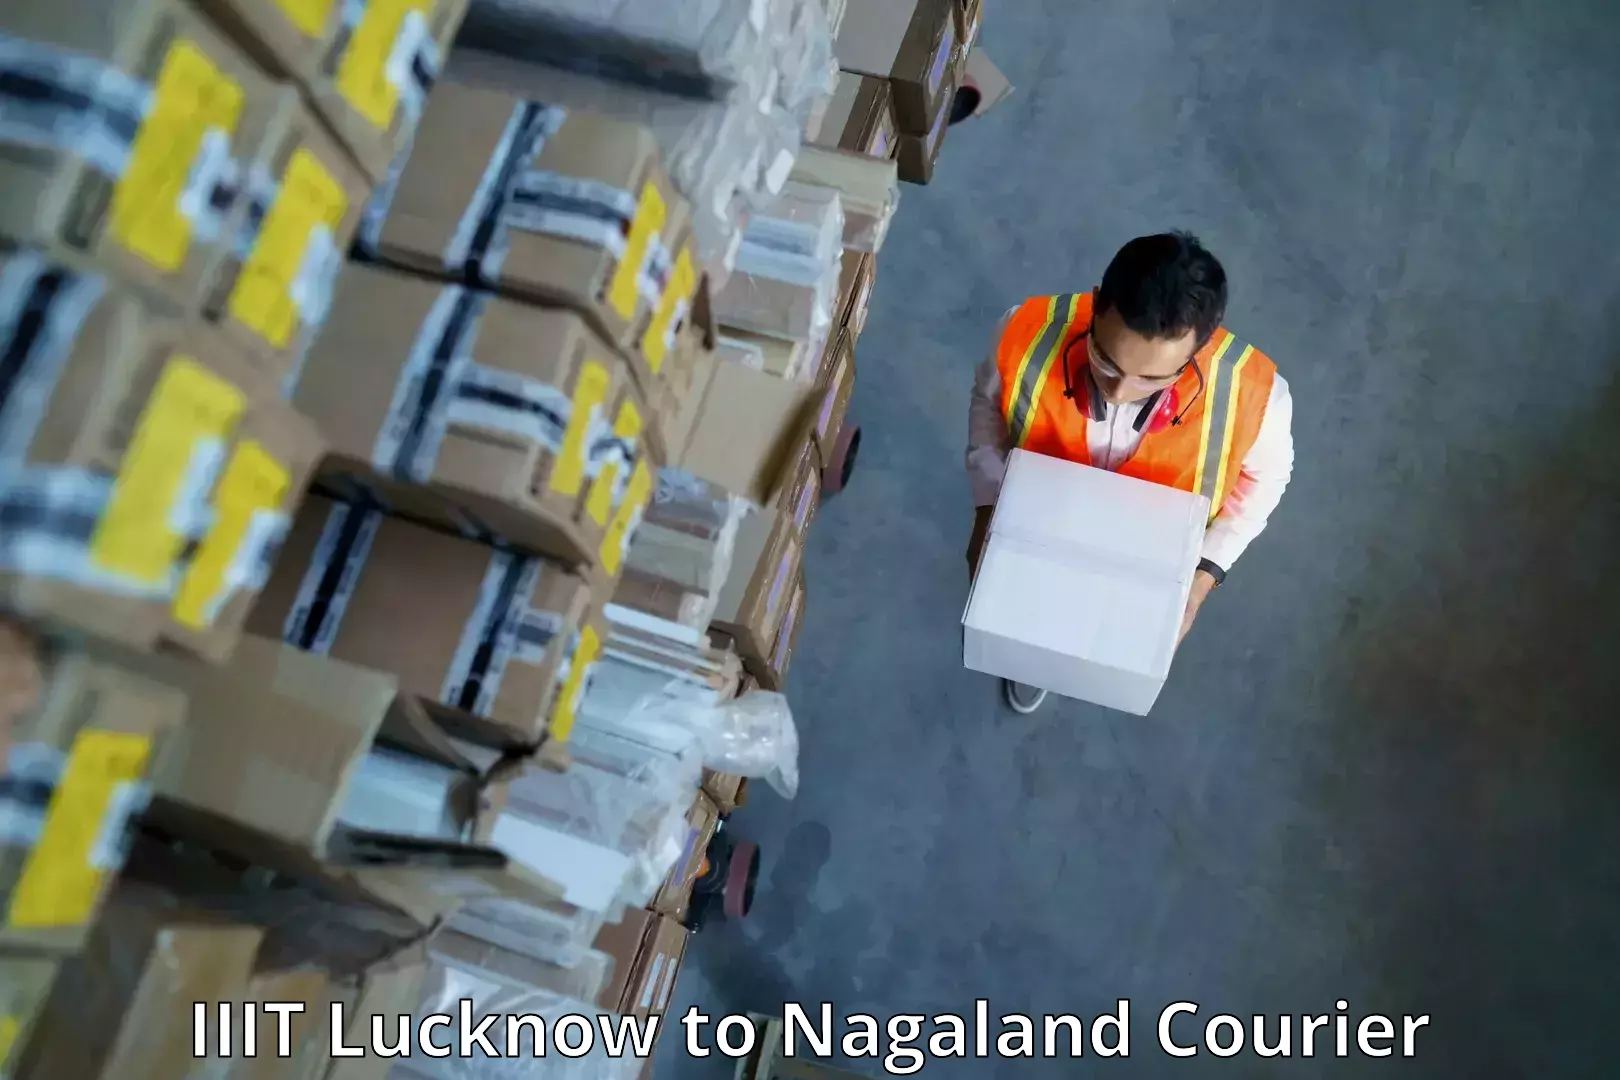 Local delivery service IIIT Lucknow to Nagaland